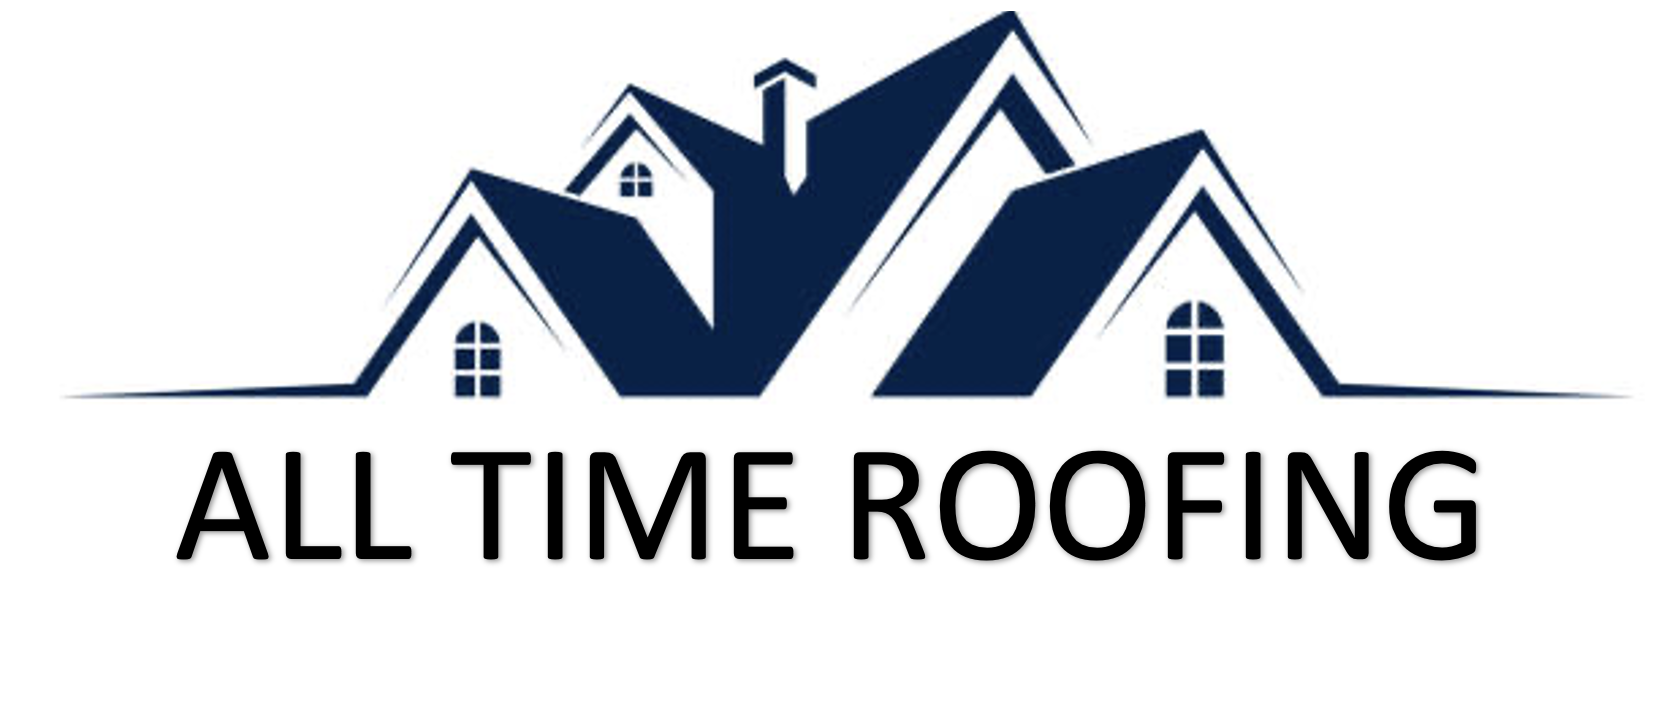 All time Roofing Logo